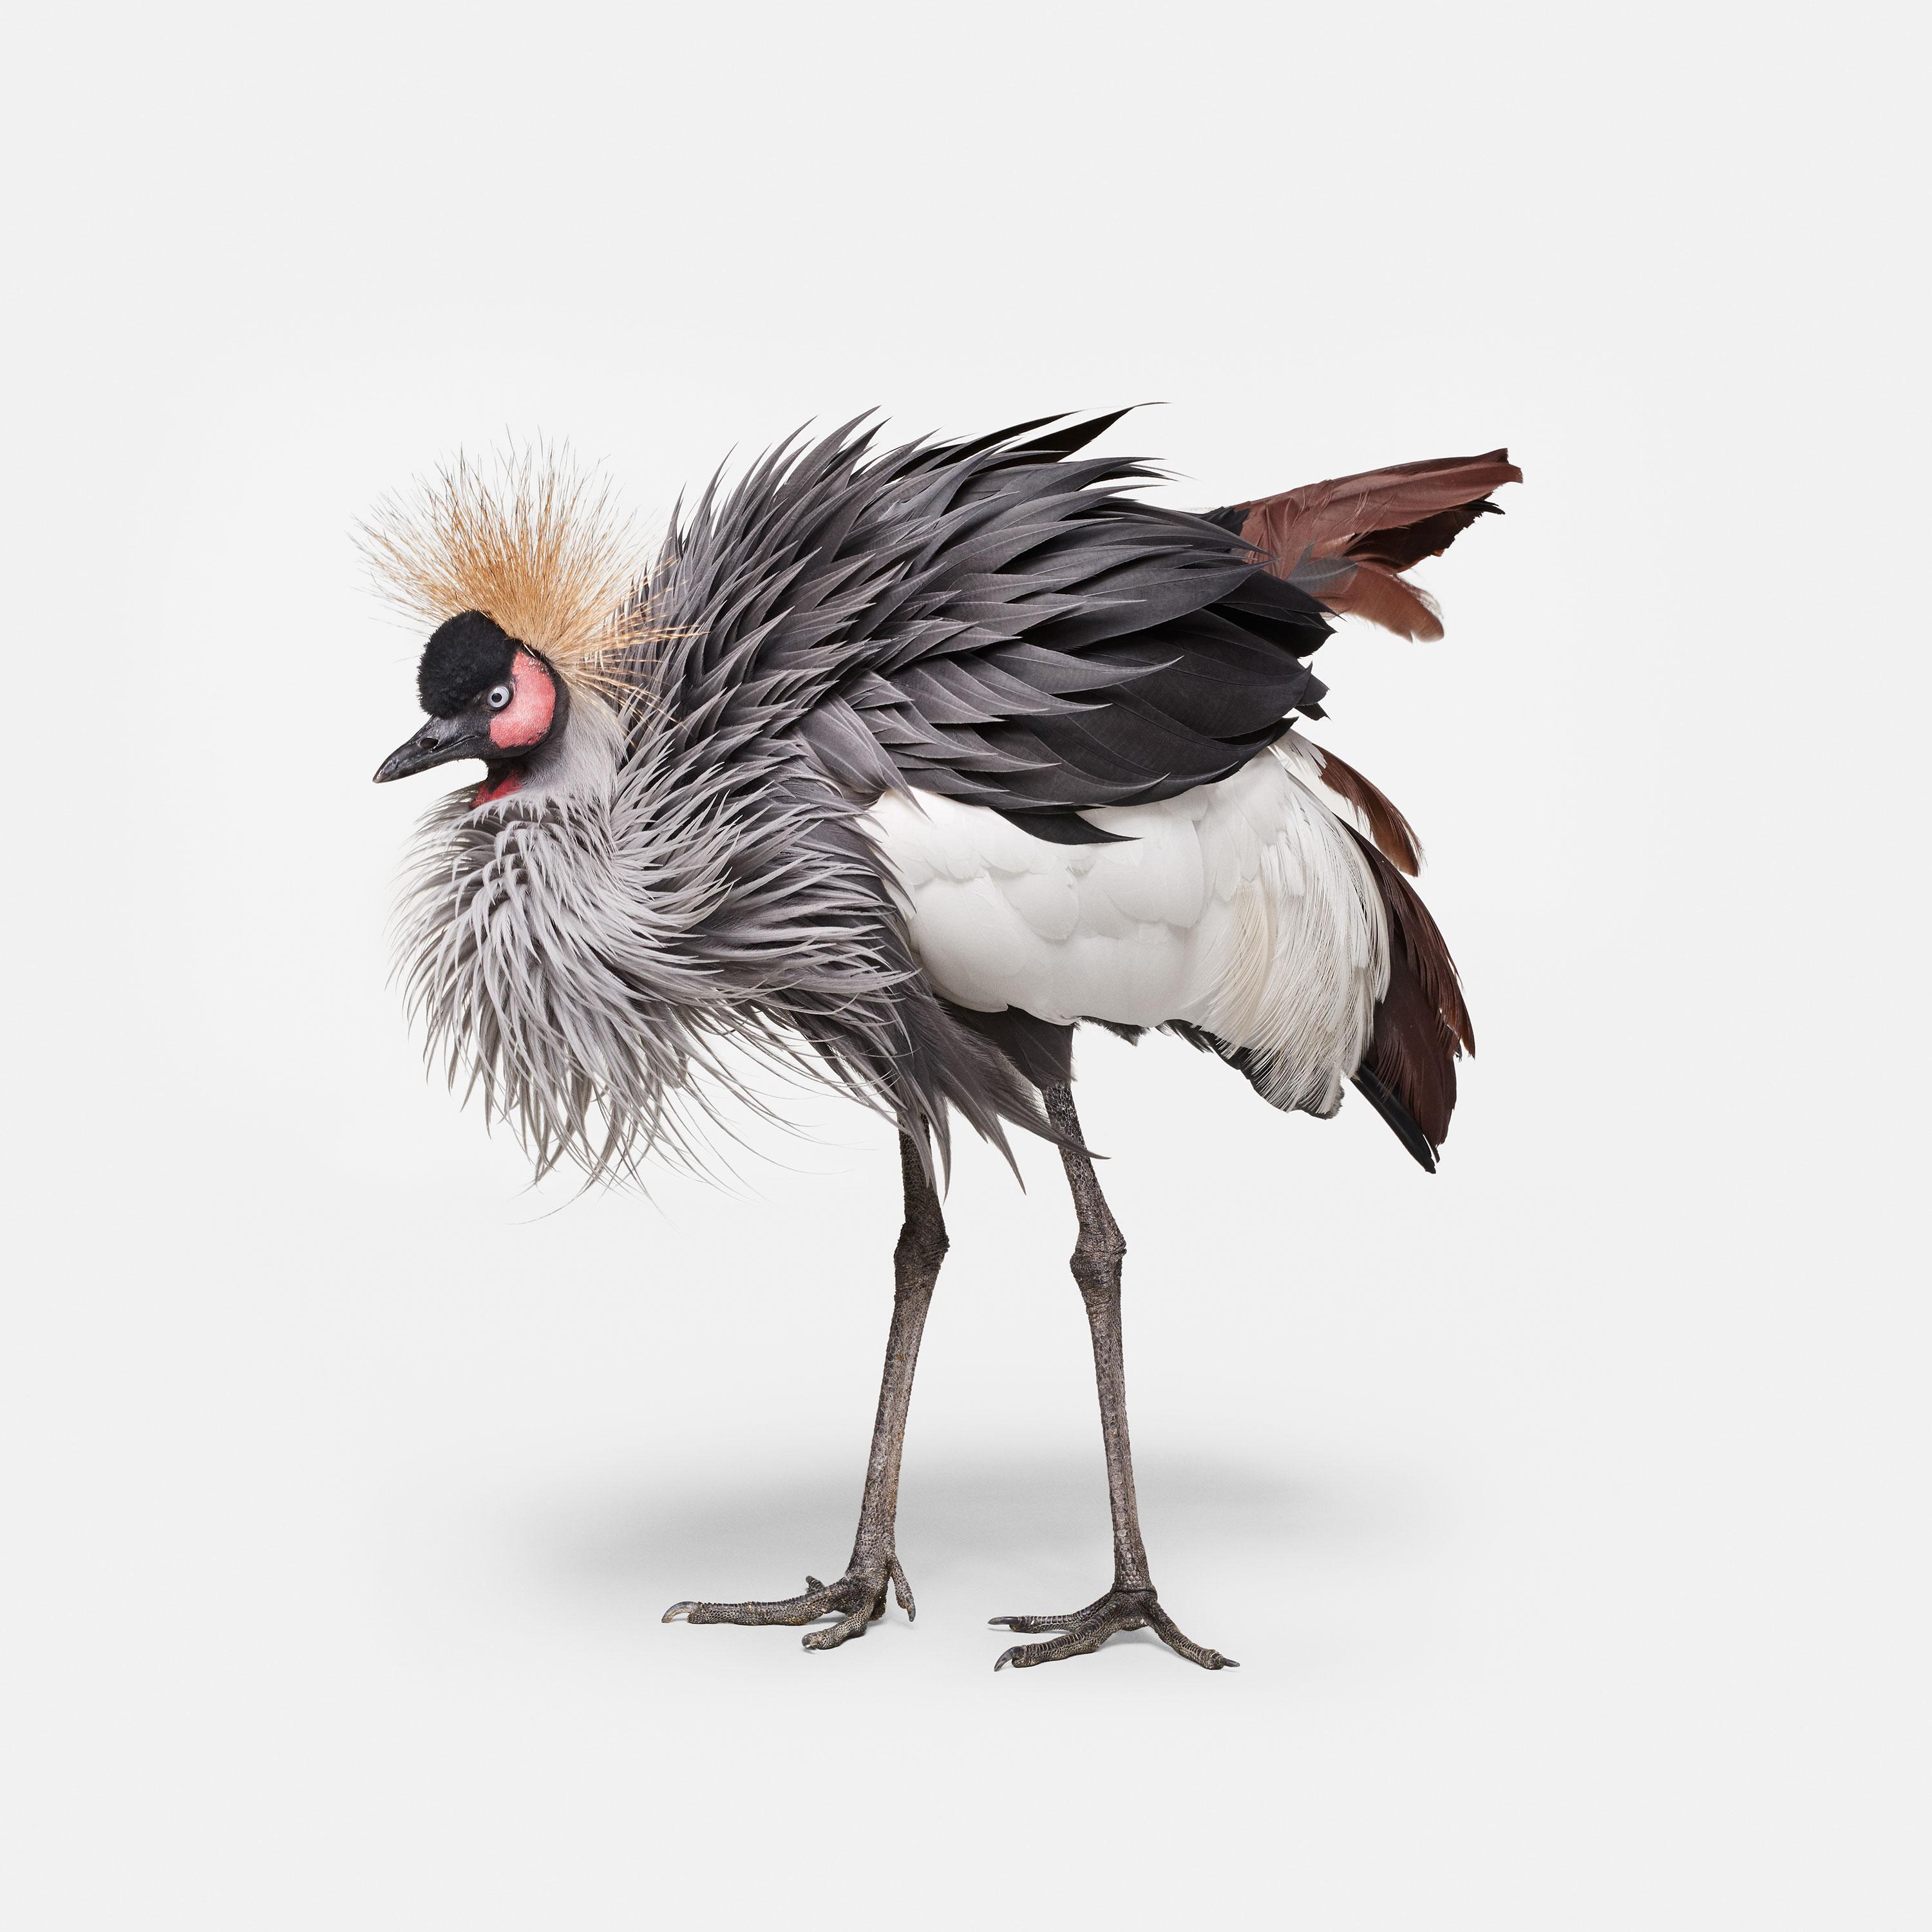 Randal Ford - African Crane No. 2, Photography 2018, Printed After